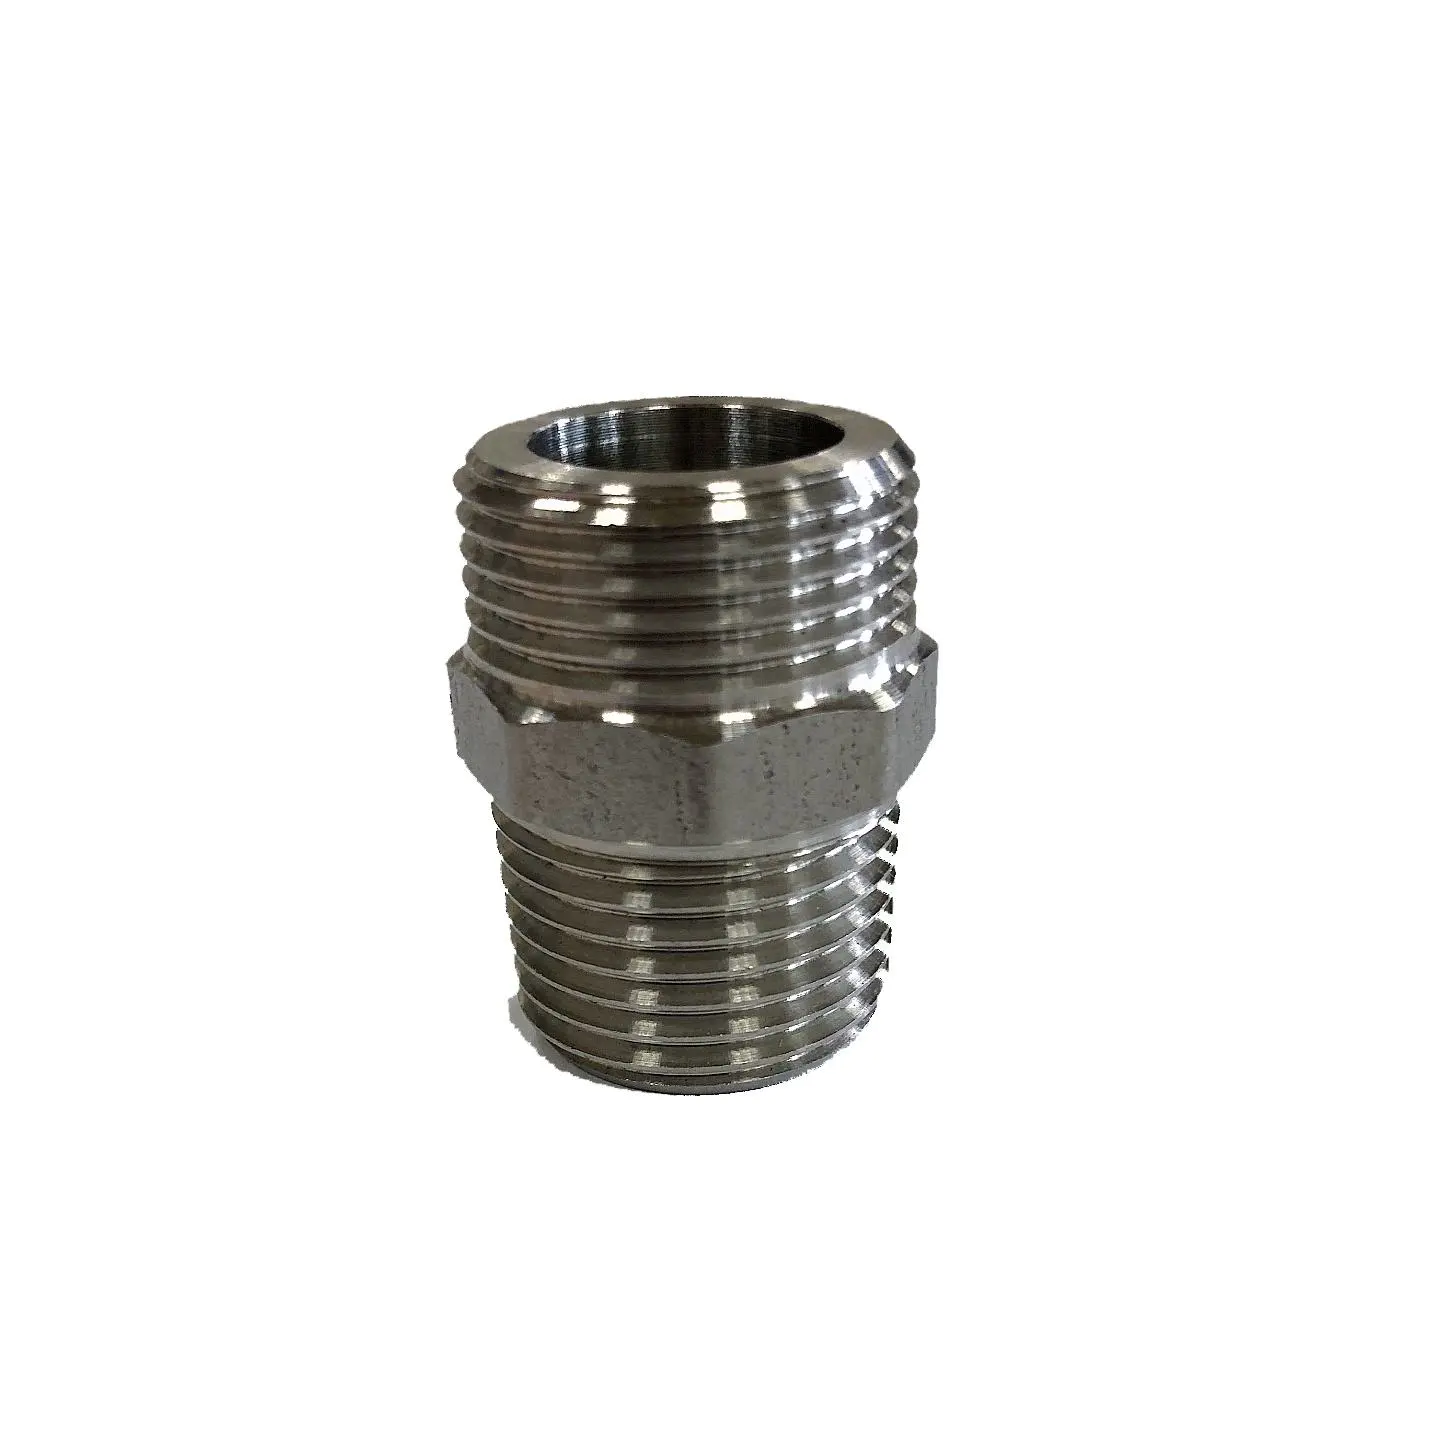 china hot sales wholesales 304 316 stainless steel male/female threaded adaptor union fittings